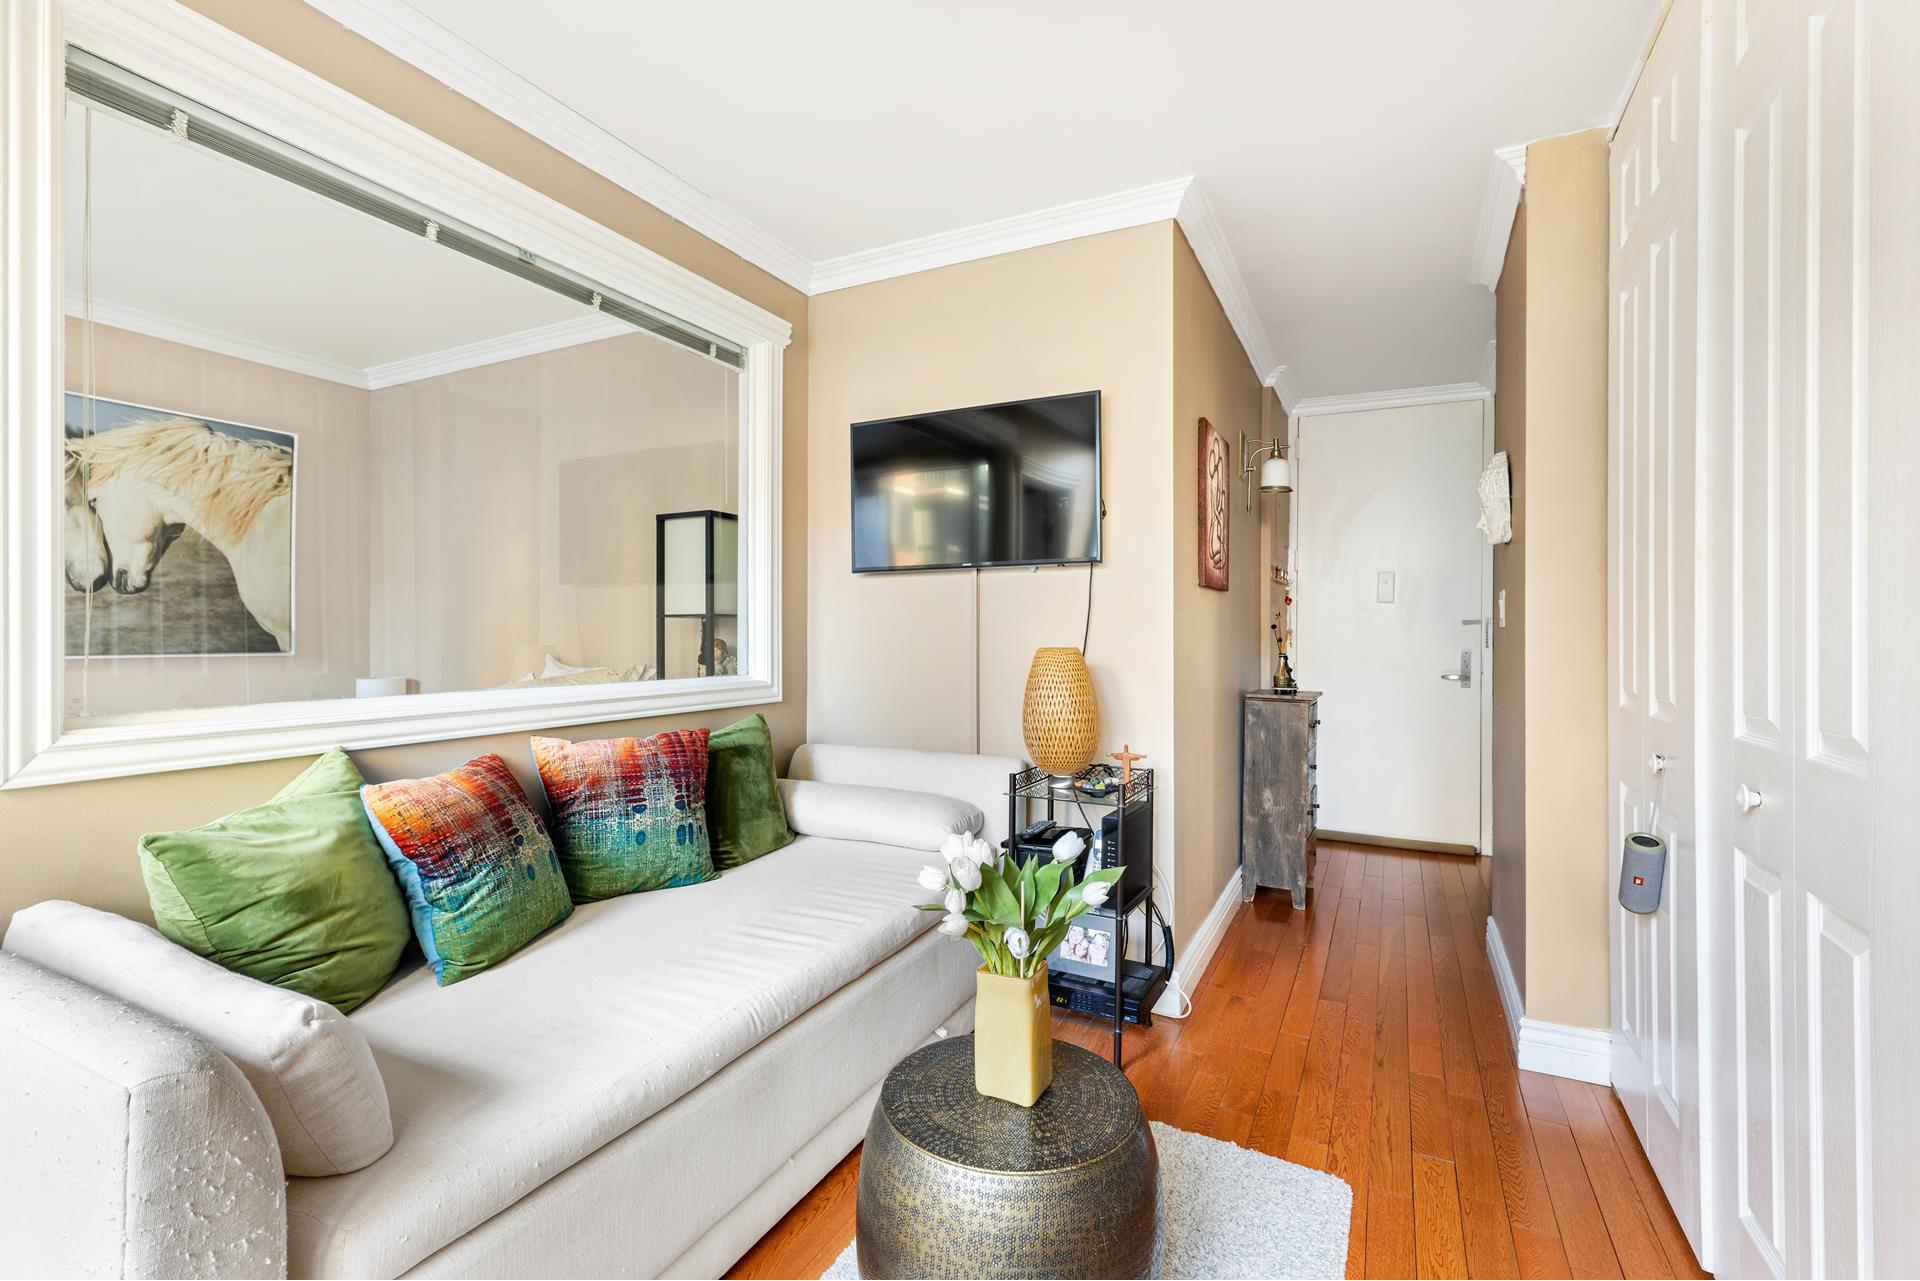 343 East 74th Street 5D, Lenox Hill, Upper East Side, NYC - 1 Bedrooms  
1 Bathrooms  
3 Rooms - 